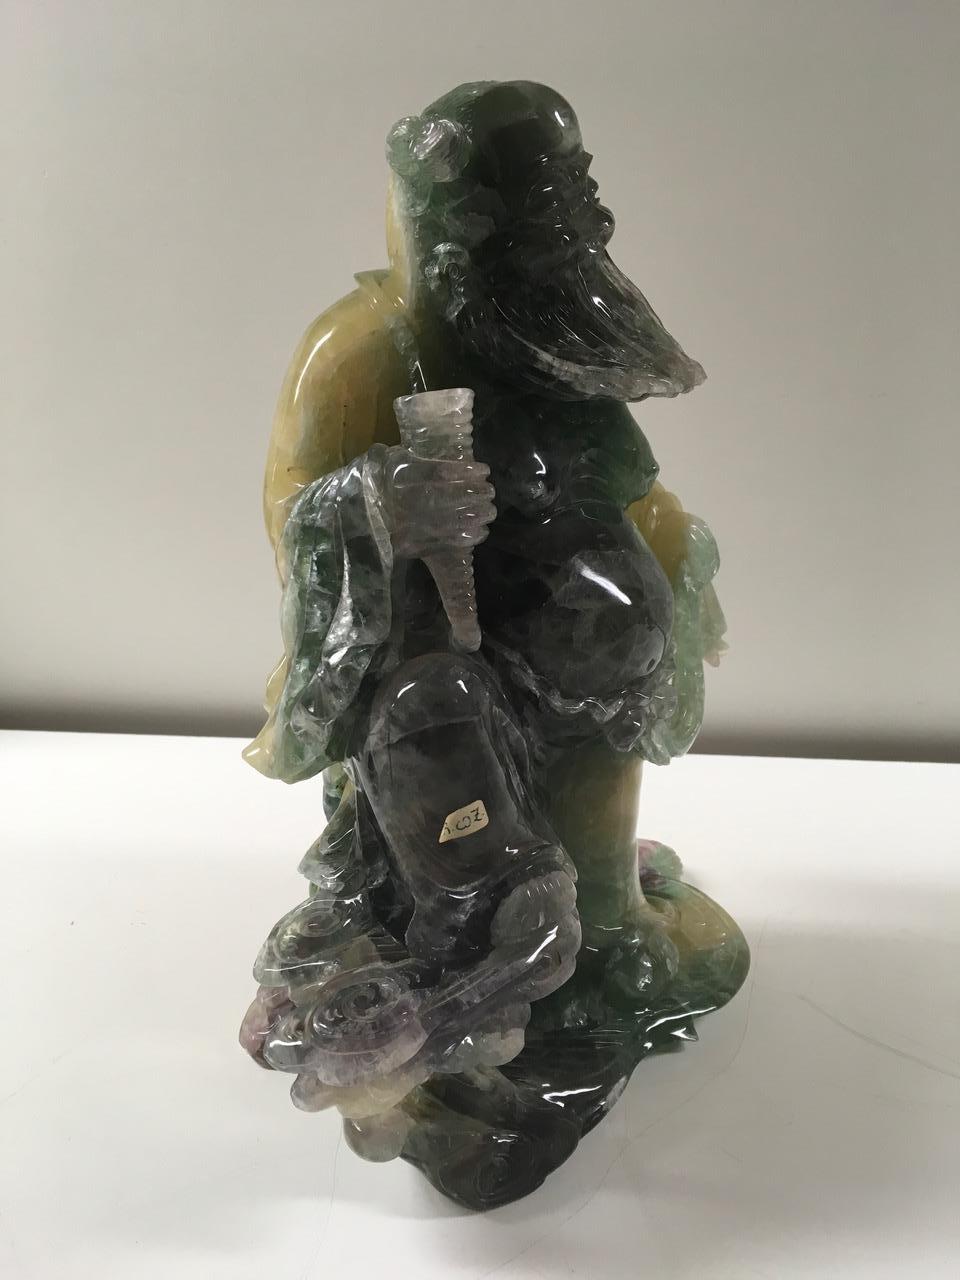 A beautiful sculpture in stone of Fluorite produced in China. Fluorite is a mineral composed of calcium fluoride. Fluorite stimulates creativity and imagination.
Italian private collection.